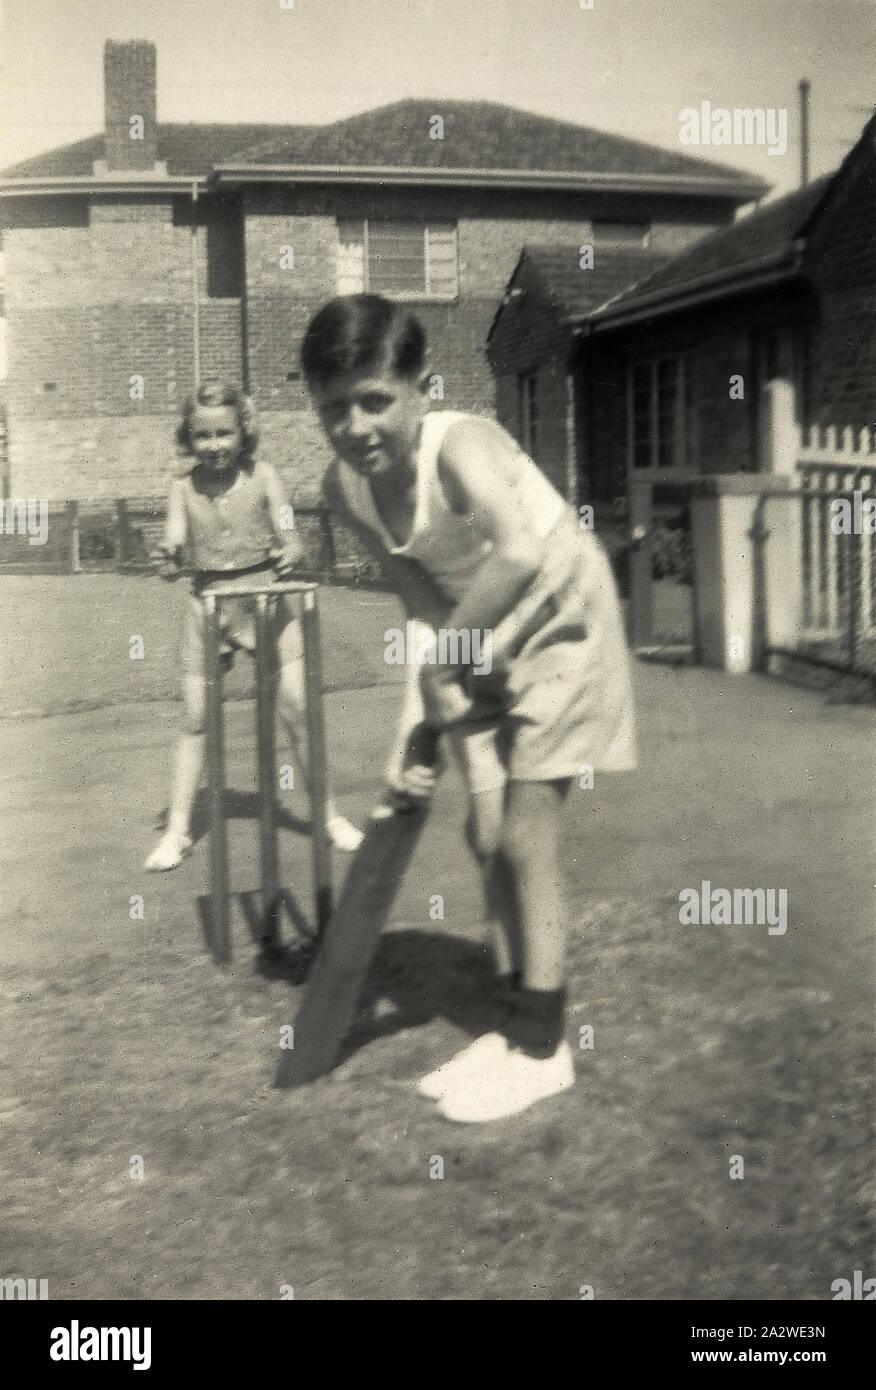 Digital Photograph - Boy & Girl Playing Cricket in Front Yard, Prahran, 1948, Black and white photograph showing Kevin Greenhatch, aged 8, playing cricket with Valerie McKrall in December 1948. Kevin and Valerie are on the footpath outside Kevin's family home in Prahran, an inner eastern suburb of Melbourne Stock Photo